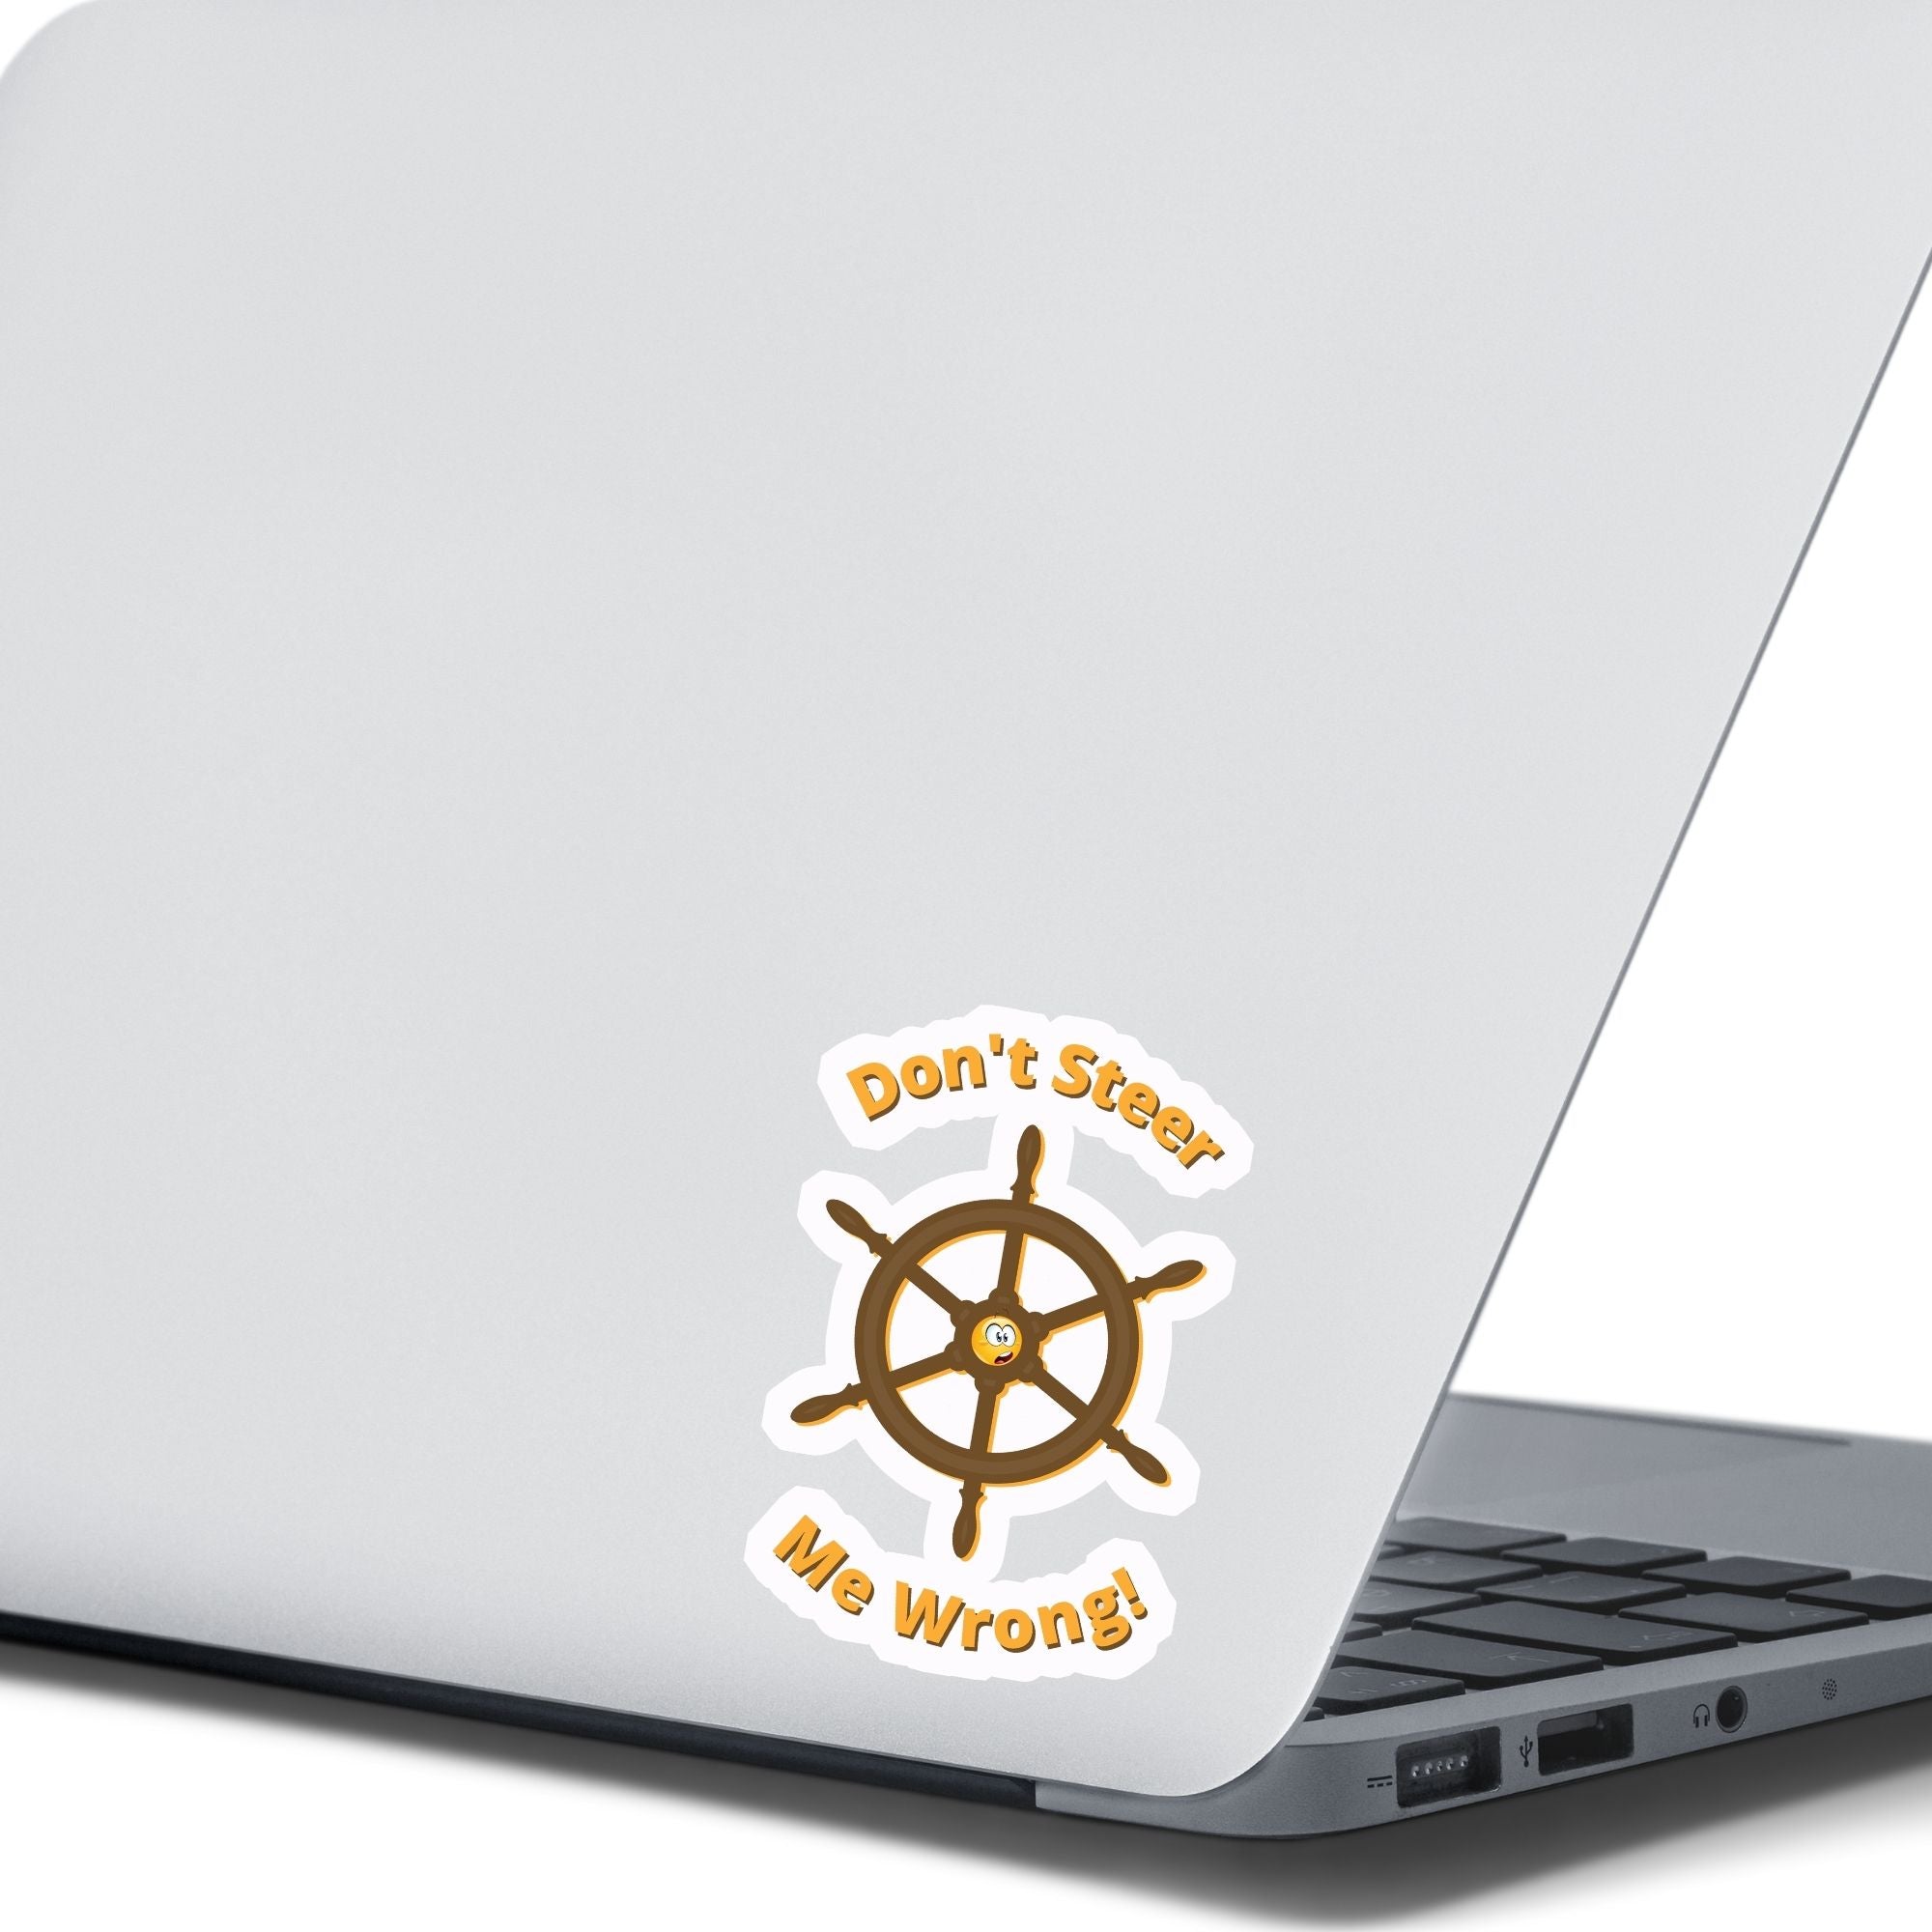 Don't Steer Me Wrong - good words to live by! This individual die-cut sticker features a wooden ship's wheel (tiller) with a shocked emoji face in the center and the words "Don't Steer Me Wrong!" above and below. This image shows the sticker on the back of an open laptop.